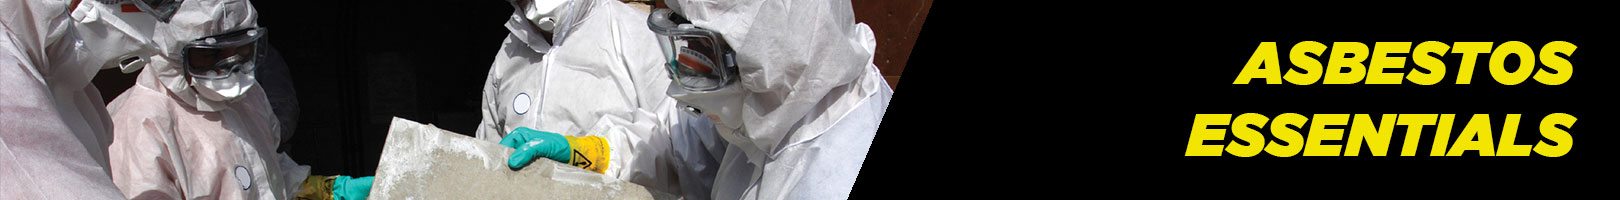 Asbestos Essentials at RSEA Safety Online - The Safety Experts